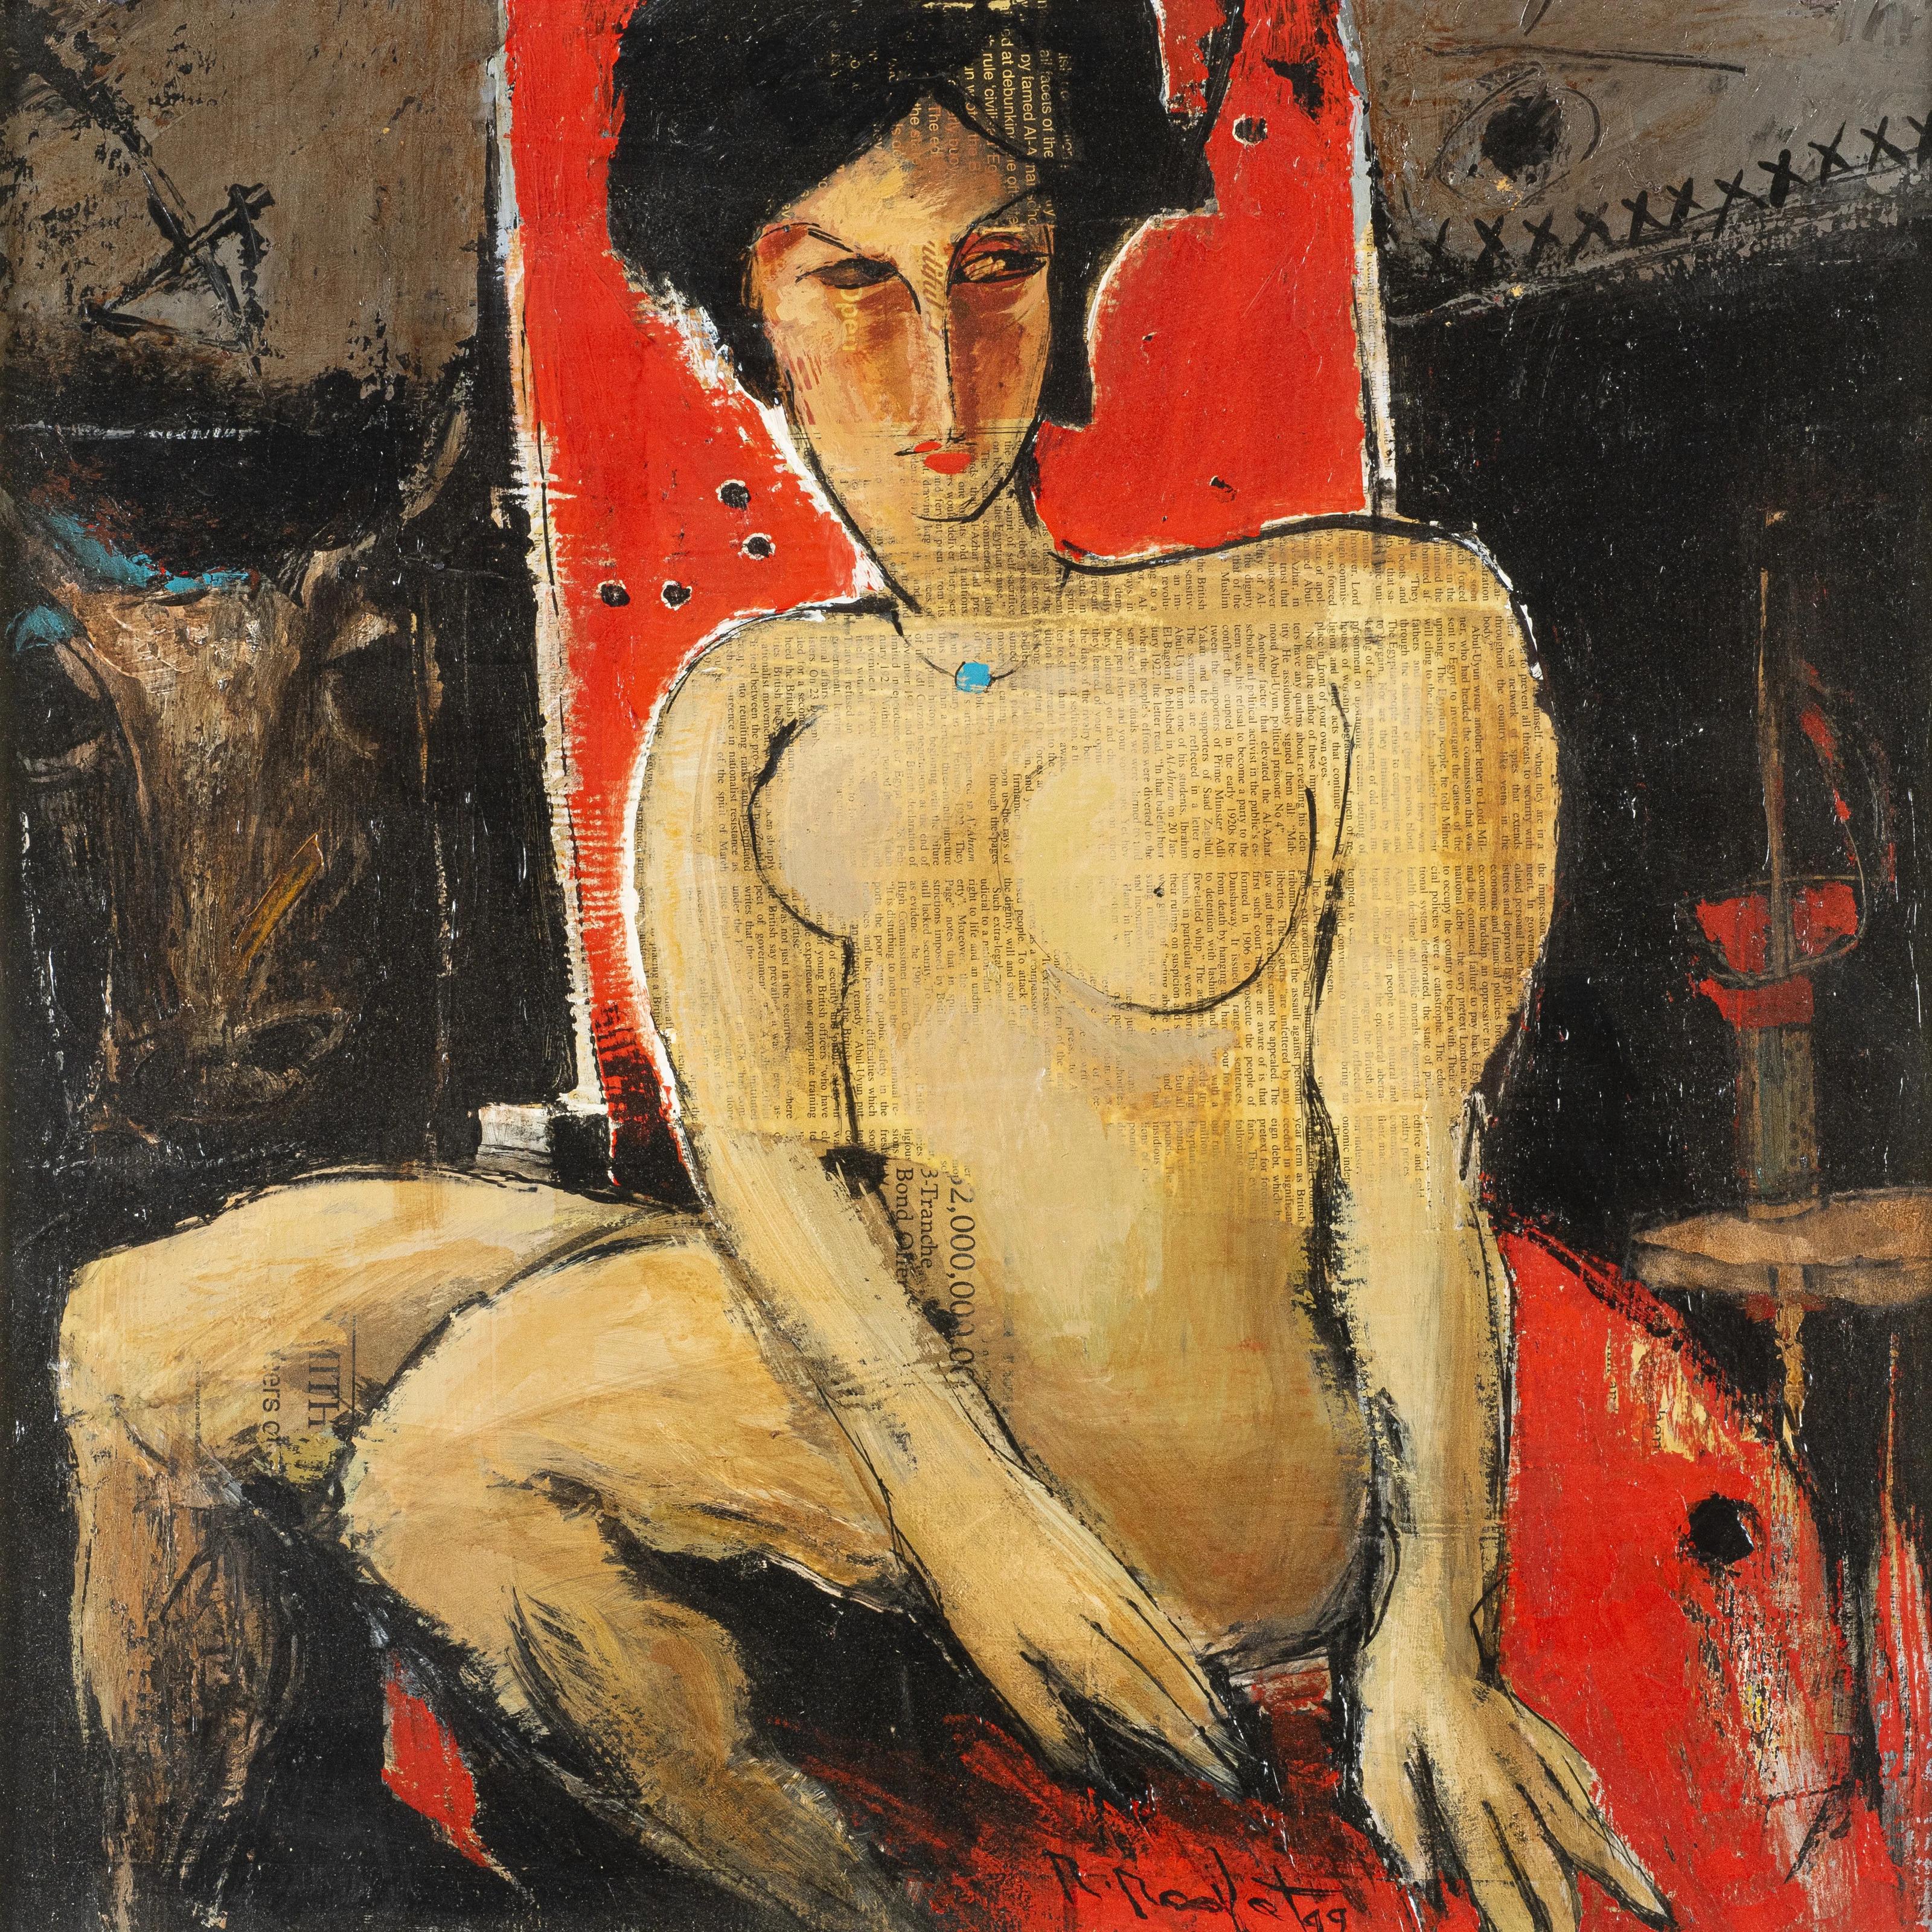 "Nude on Chair" Mixed Media Painting 22" x 22" inch by RAOUF RAAFAT

mixed media & acrylic on paper